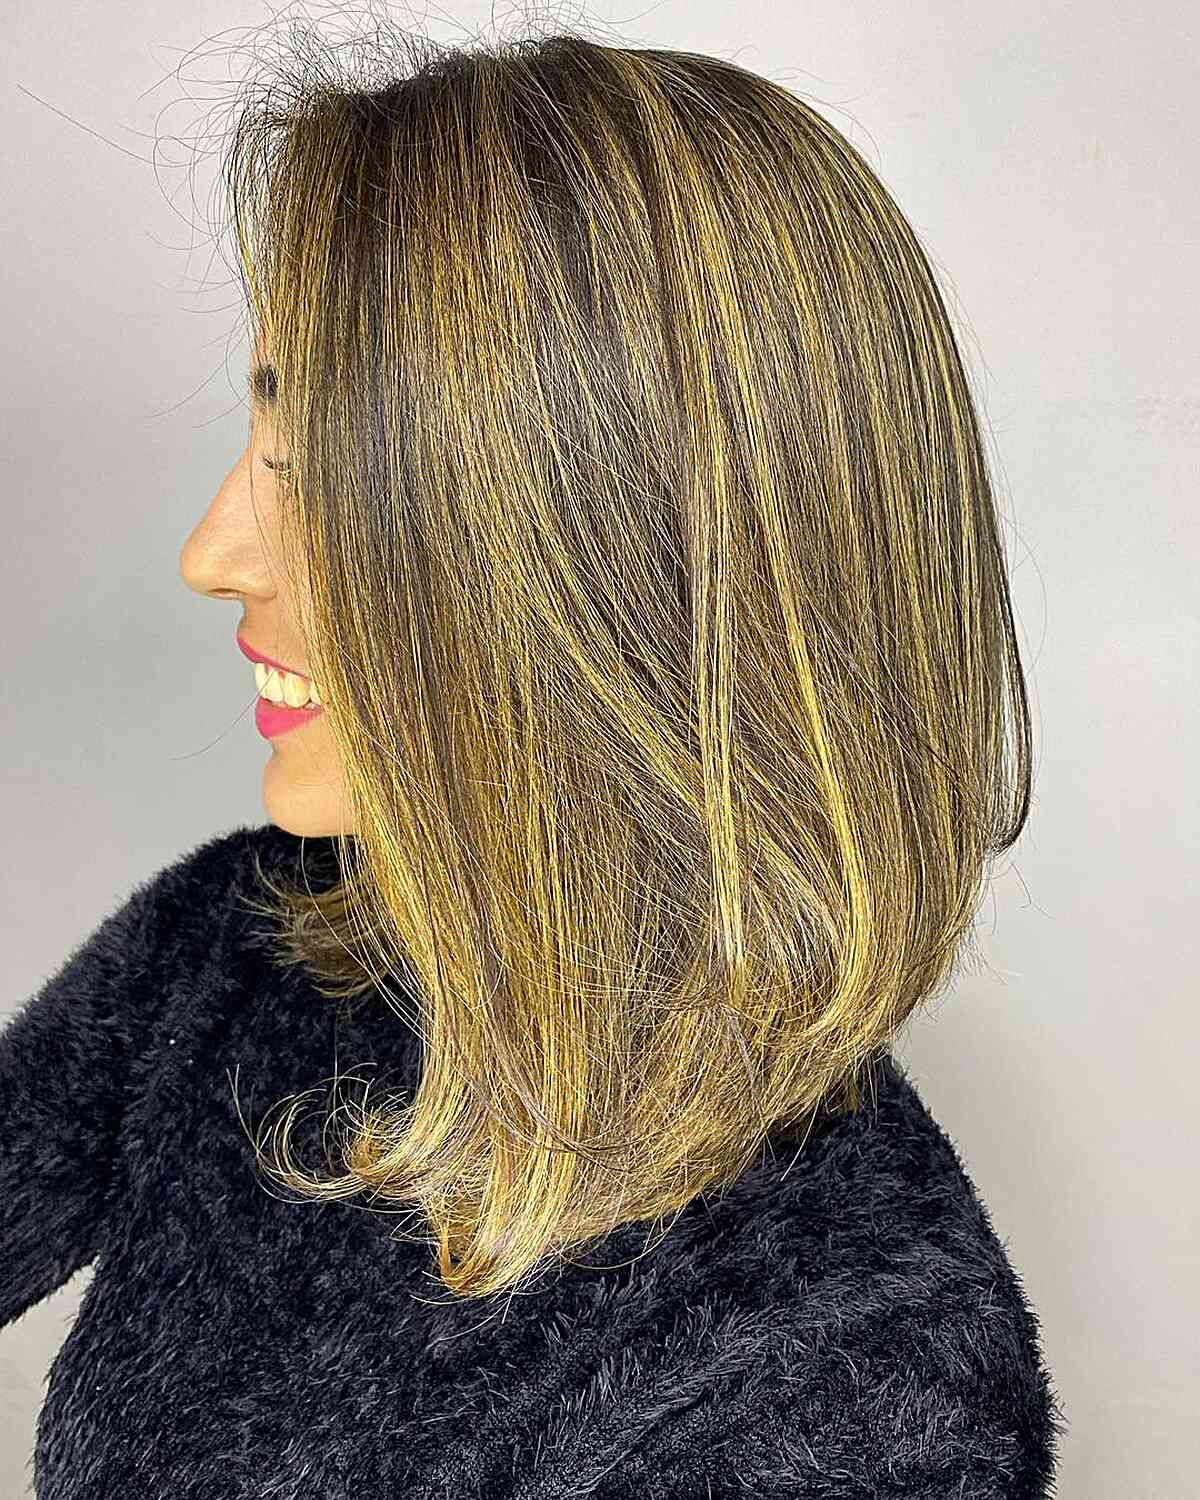 Collarbone-Length Warm Blonde Stacked Lob with Slight Graduation